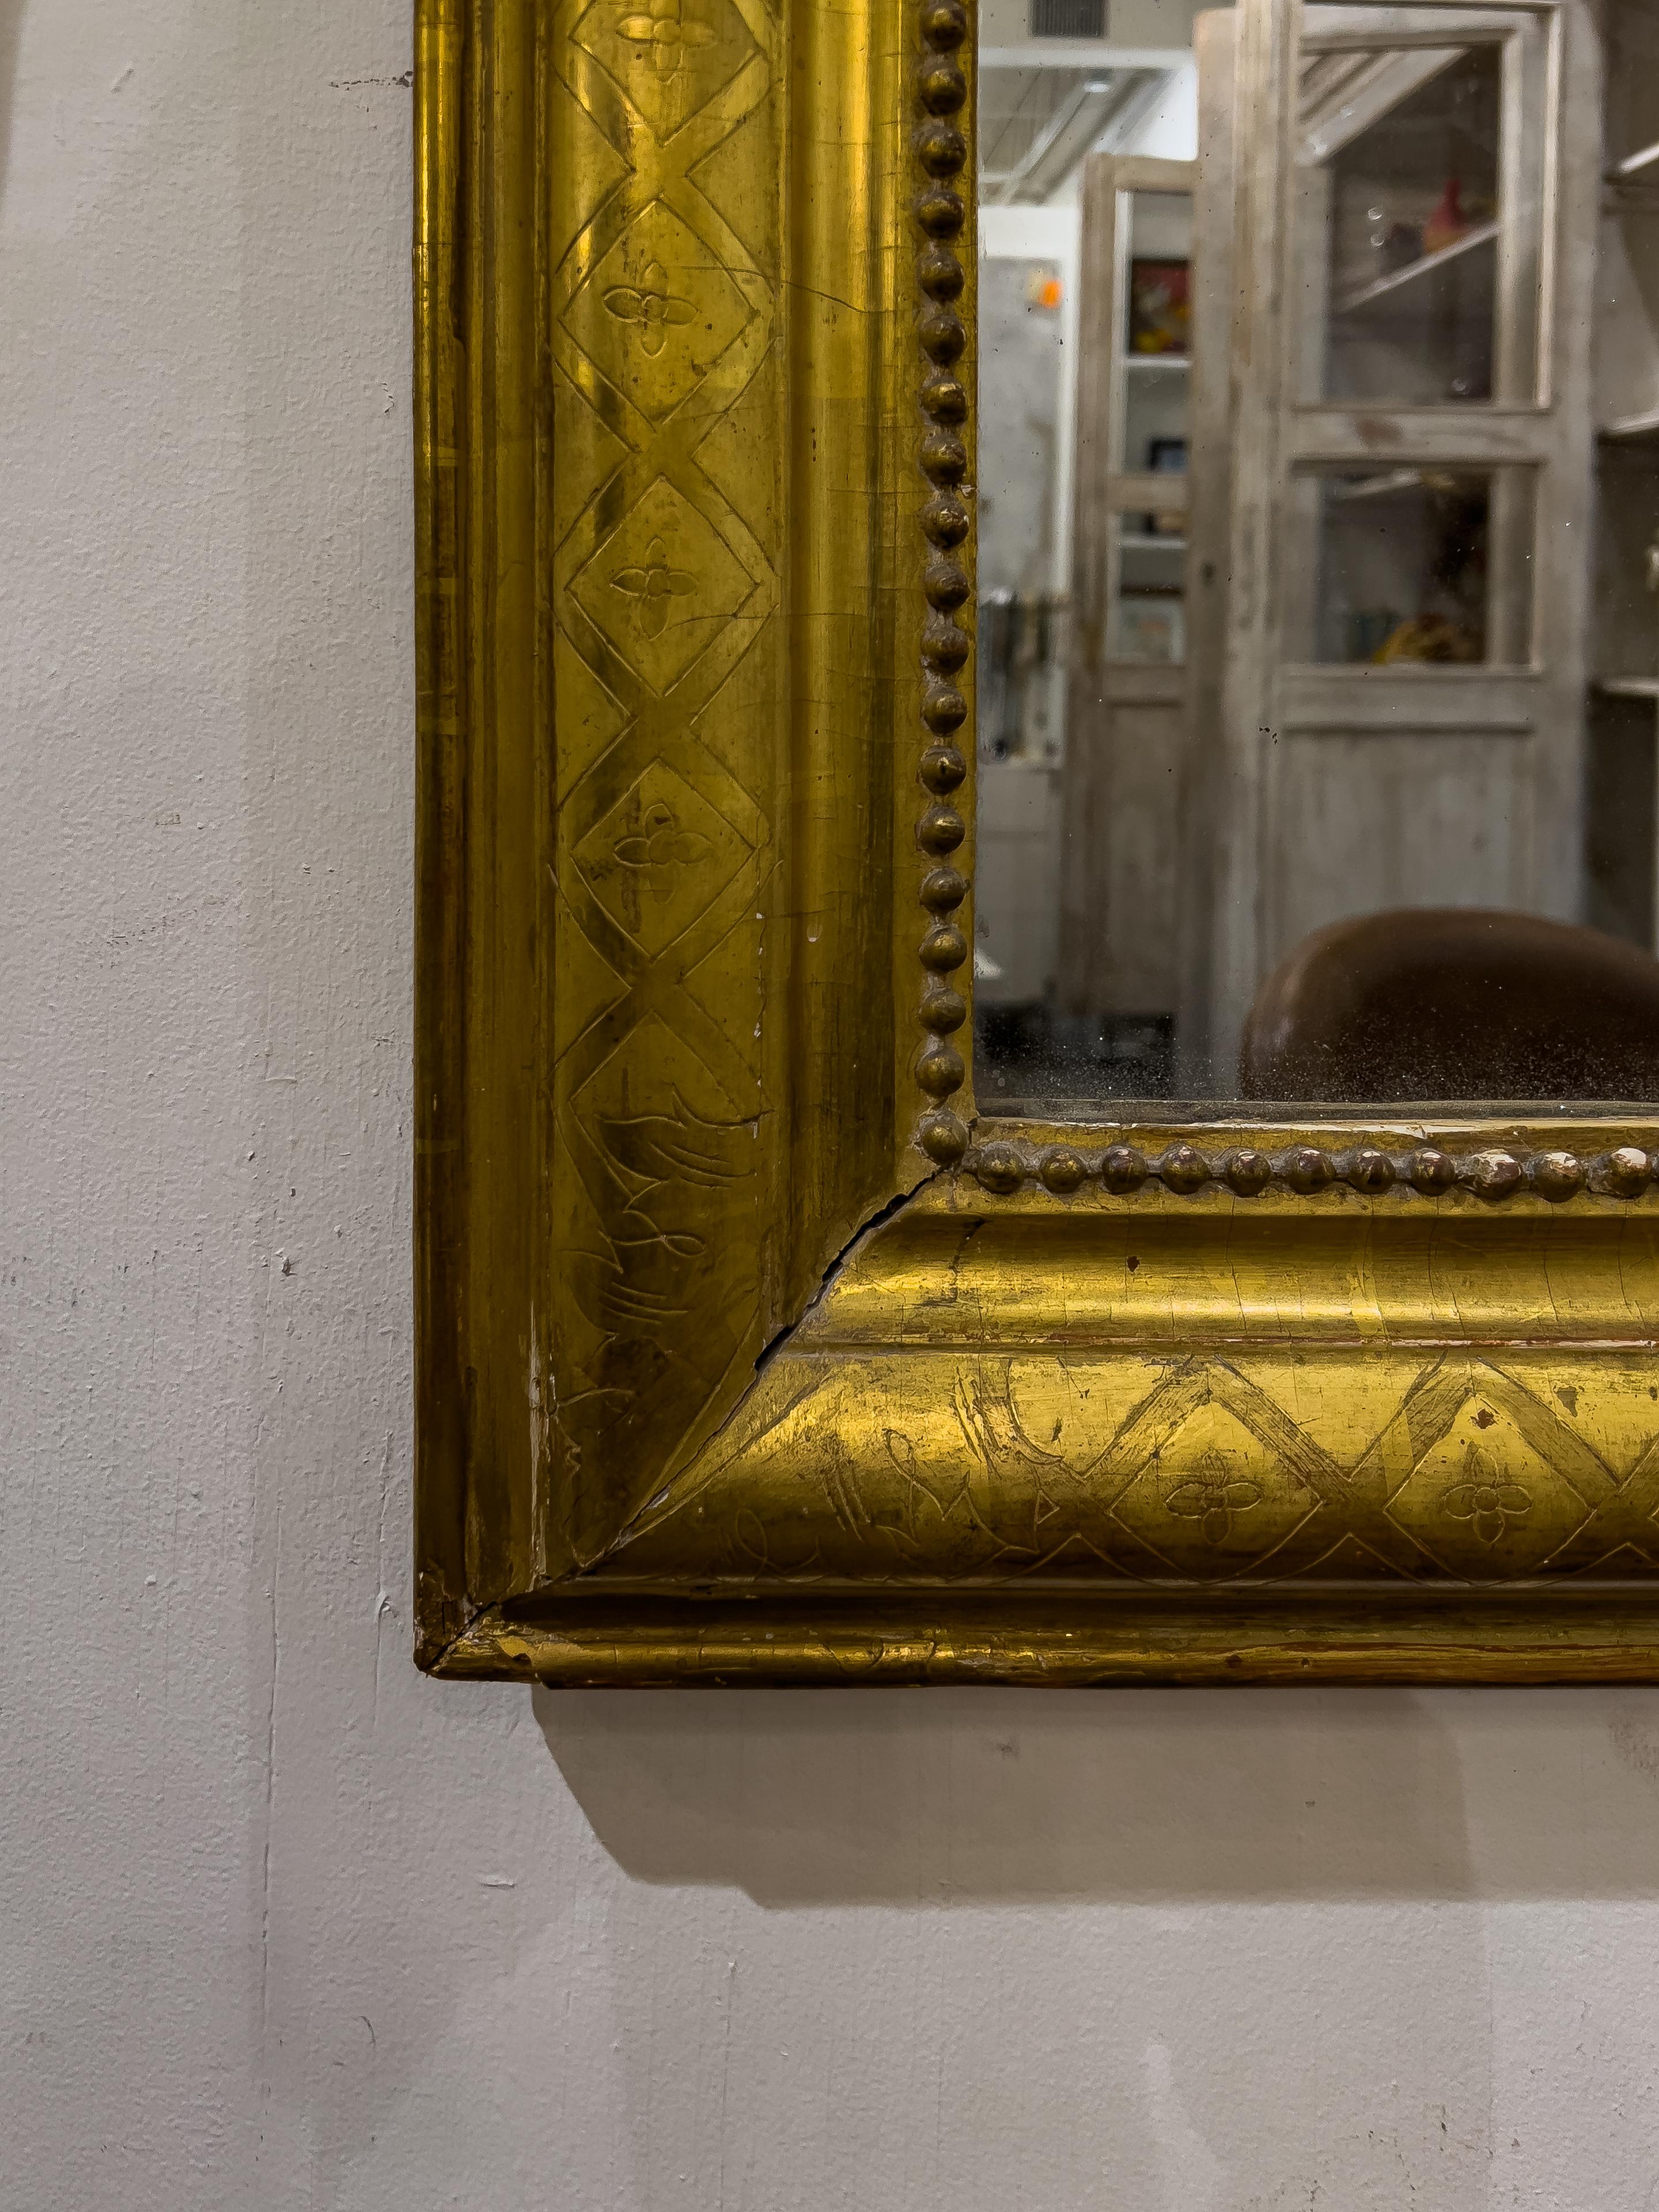 This is a beautiful gold leaf gilt Louis Philippe mirror that was made in France at the end of the 19th century. 

The rounded corners are typical for French Louis Philippe mirrors. This one has a more rare 